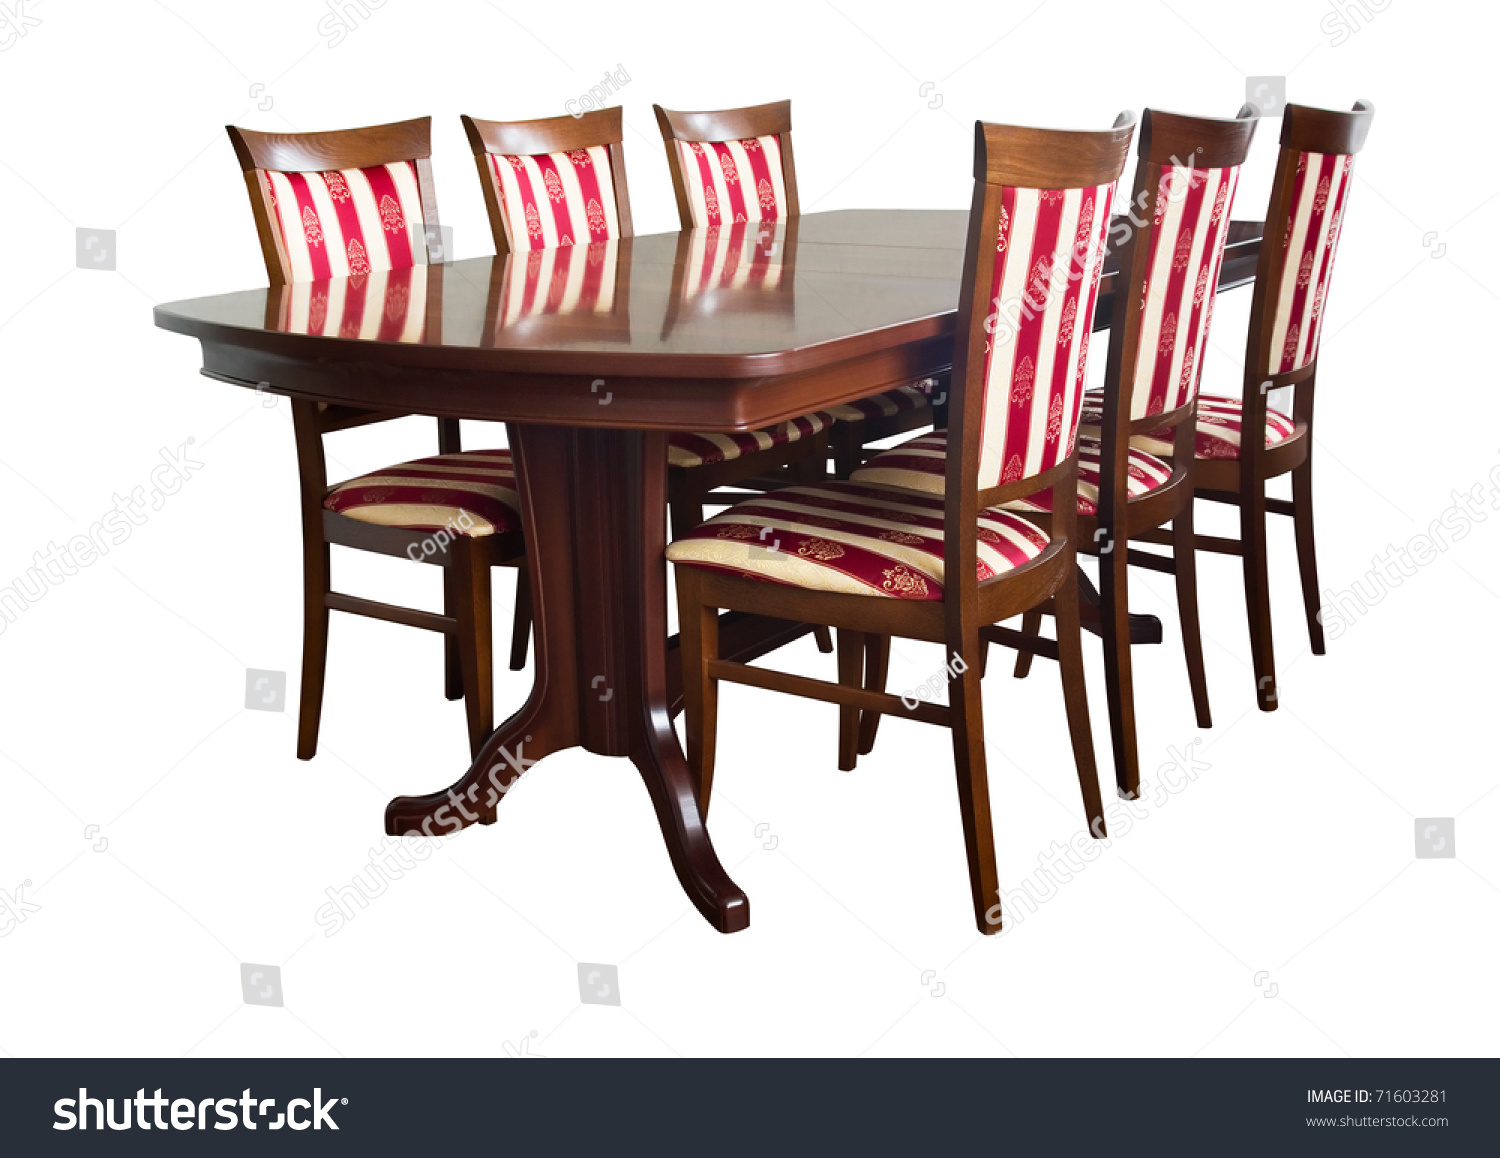 Dining Room Table Chairs For Over 500 Pounds